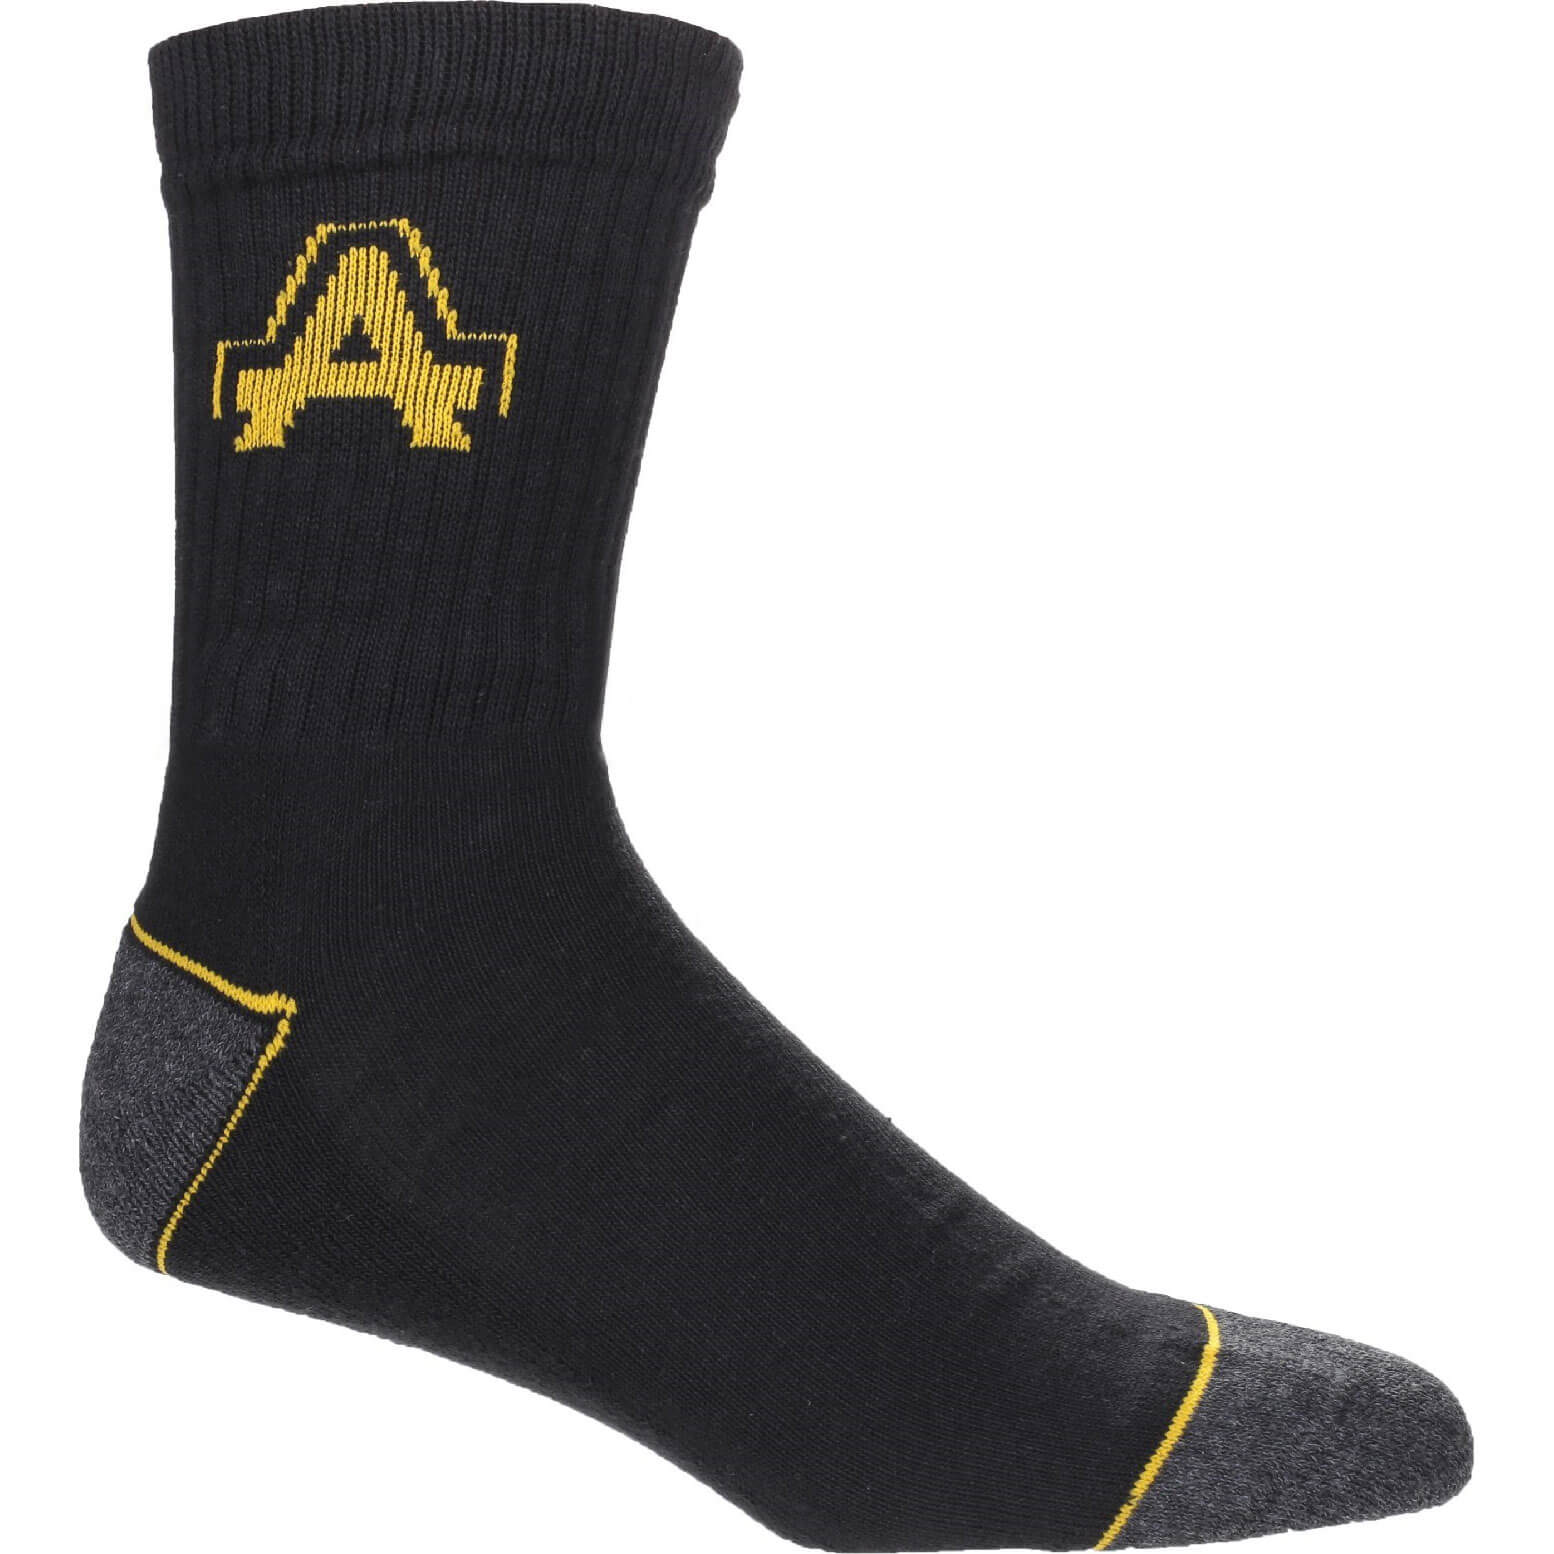 Photo of Amblers Safety Heavy Duty Work Socks 3 Pack 6 - 11